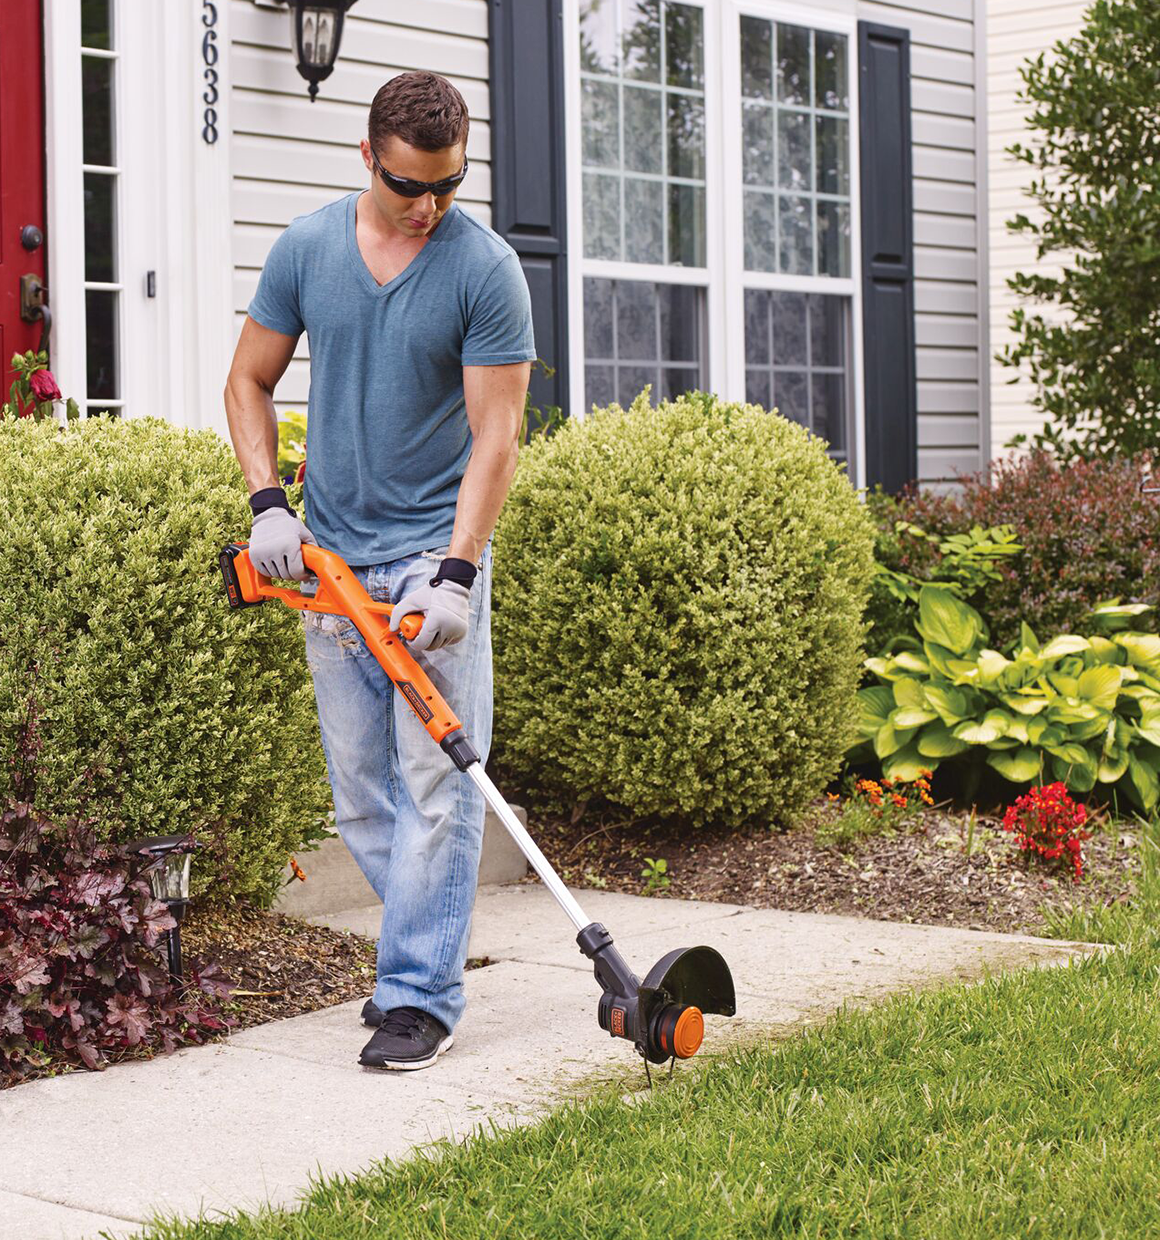 BLACK & DECKER 20V Cordless Combo Kit, String/Hedge Trimmer and Sweeper, 2  Batteries and Charger Included (BCK3789D2),Orange